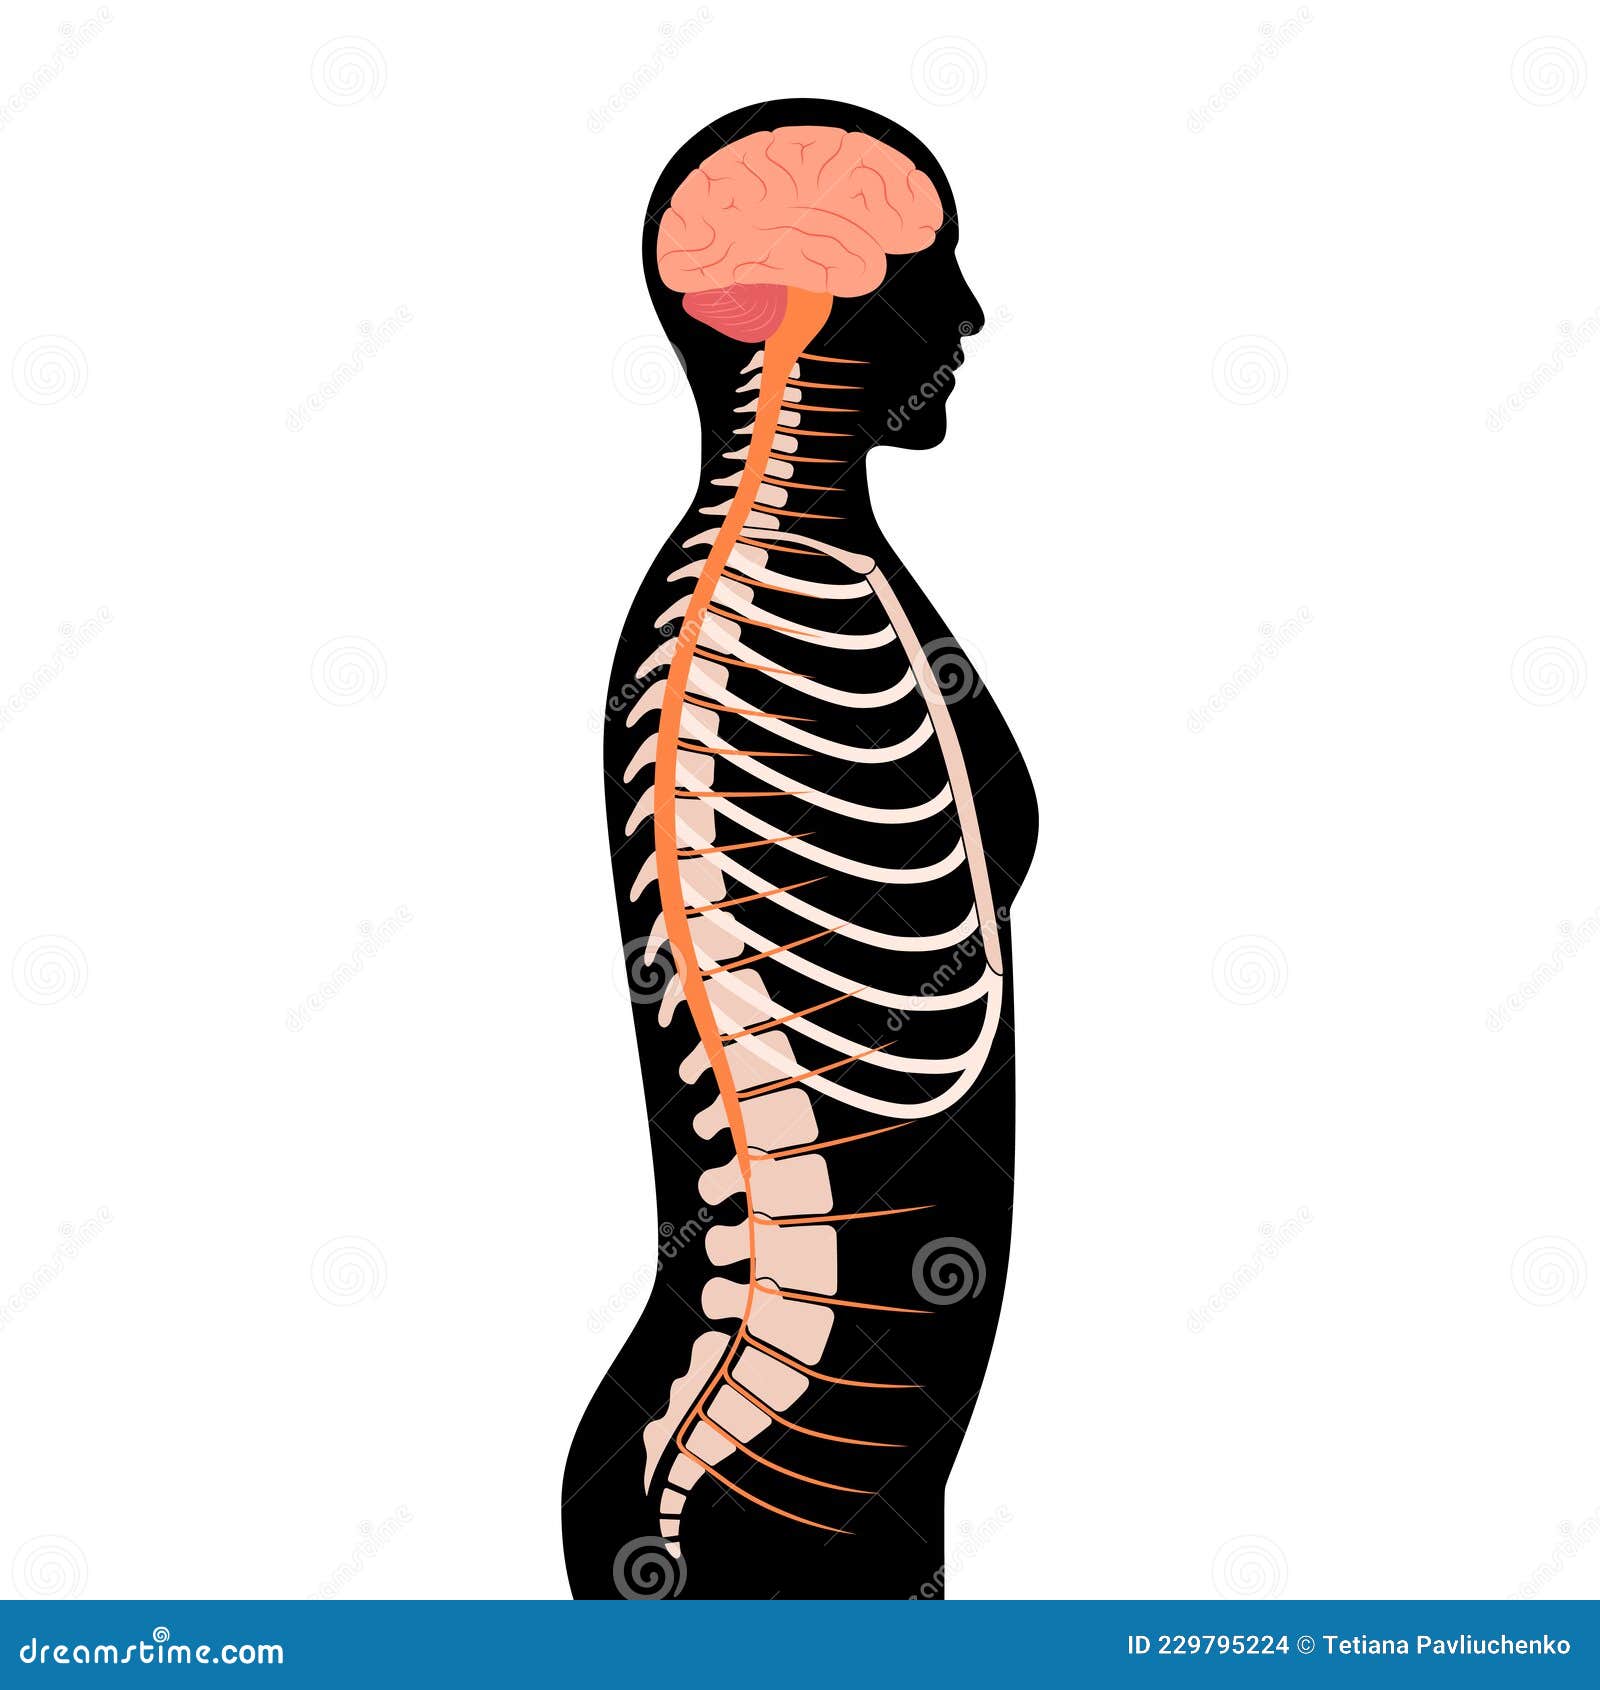 Spinal cord anatomy stock vector. Illustration of spinal - 229795224